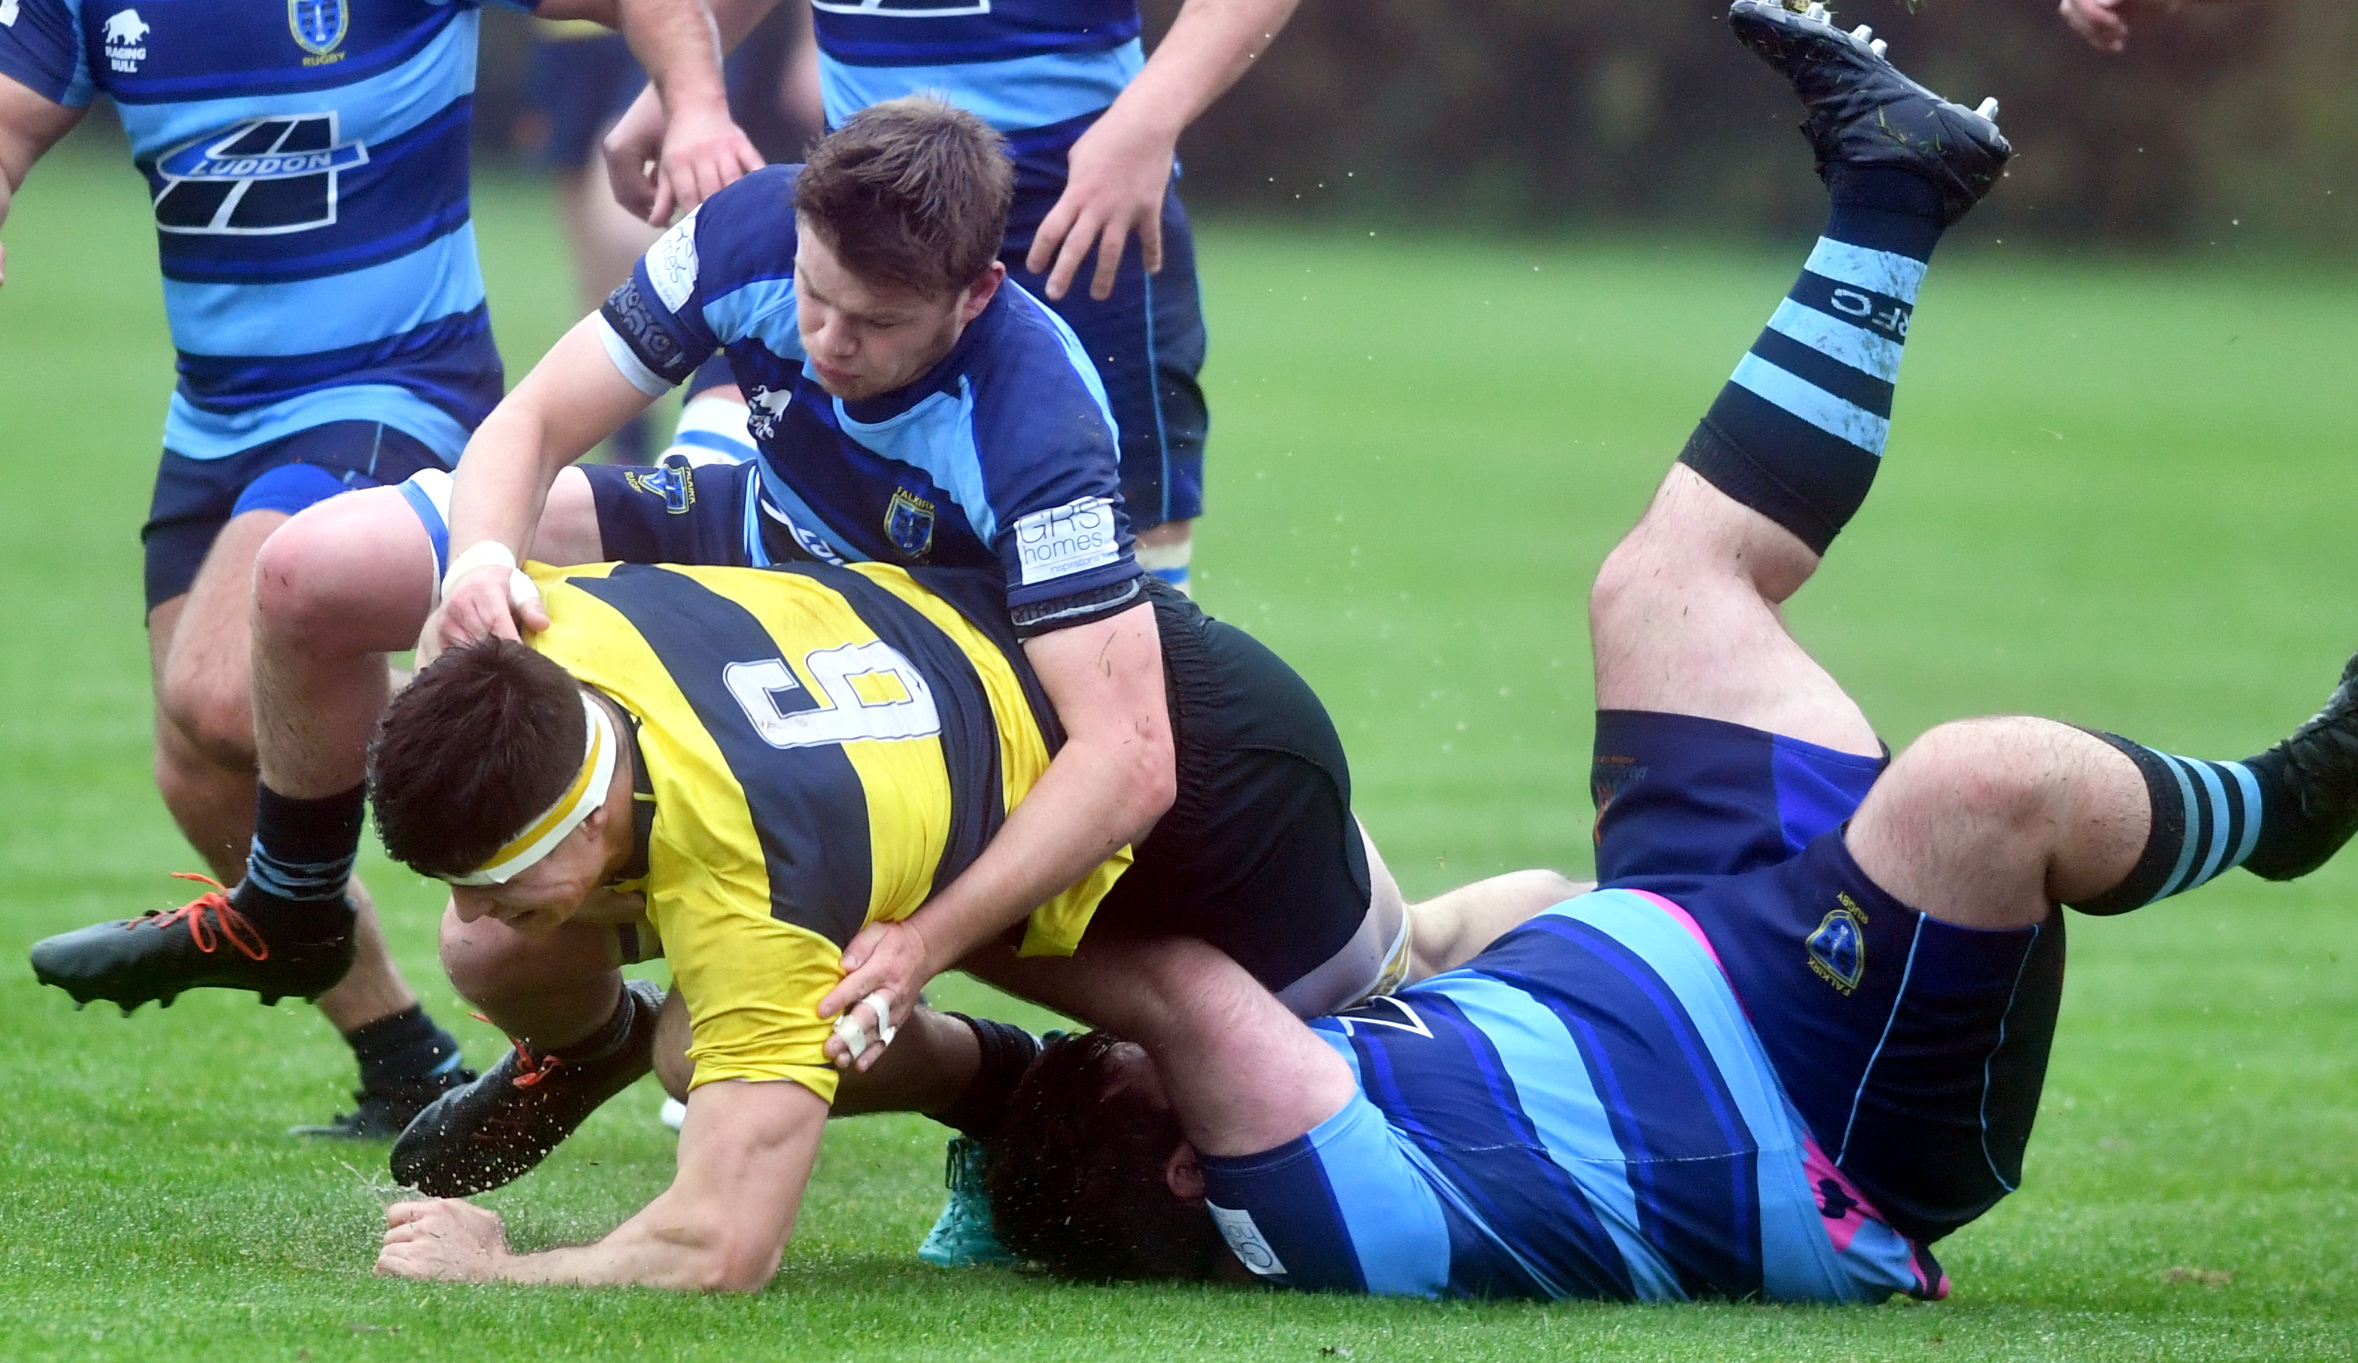 Gordonians' Cameron Howard charges through.
Picture by Chris Sumner